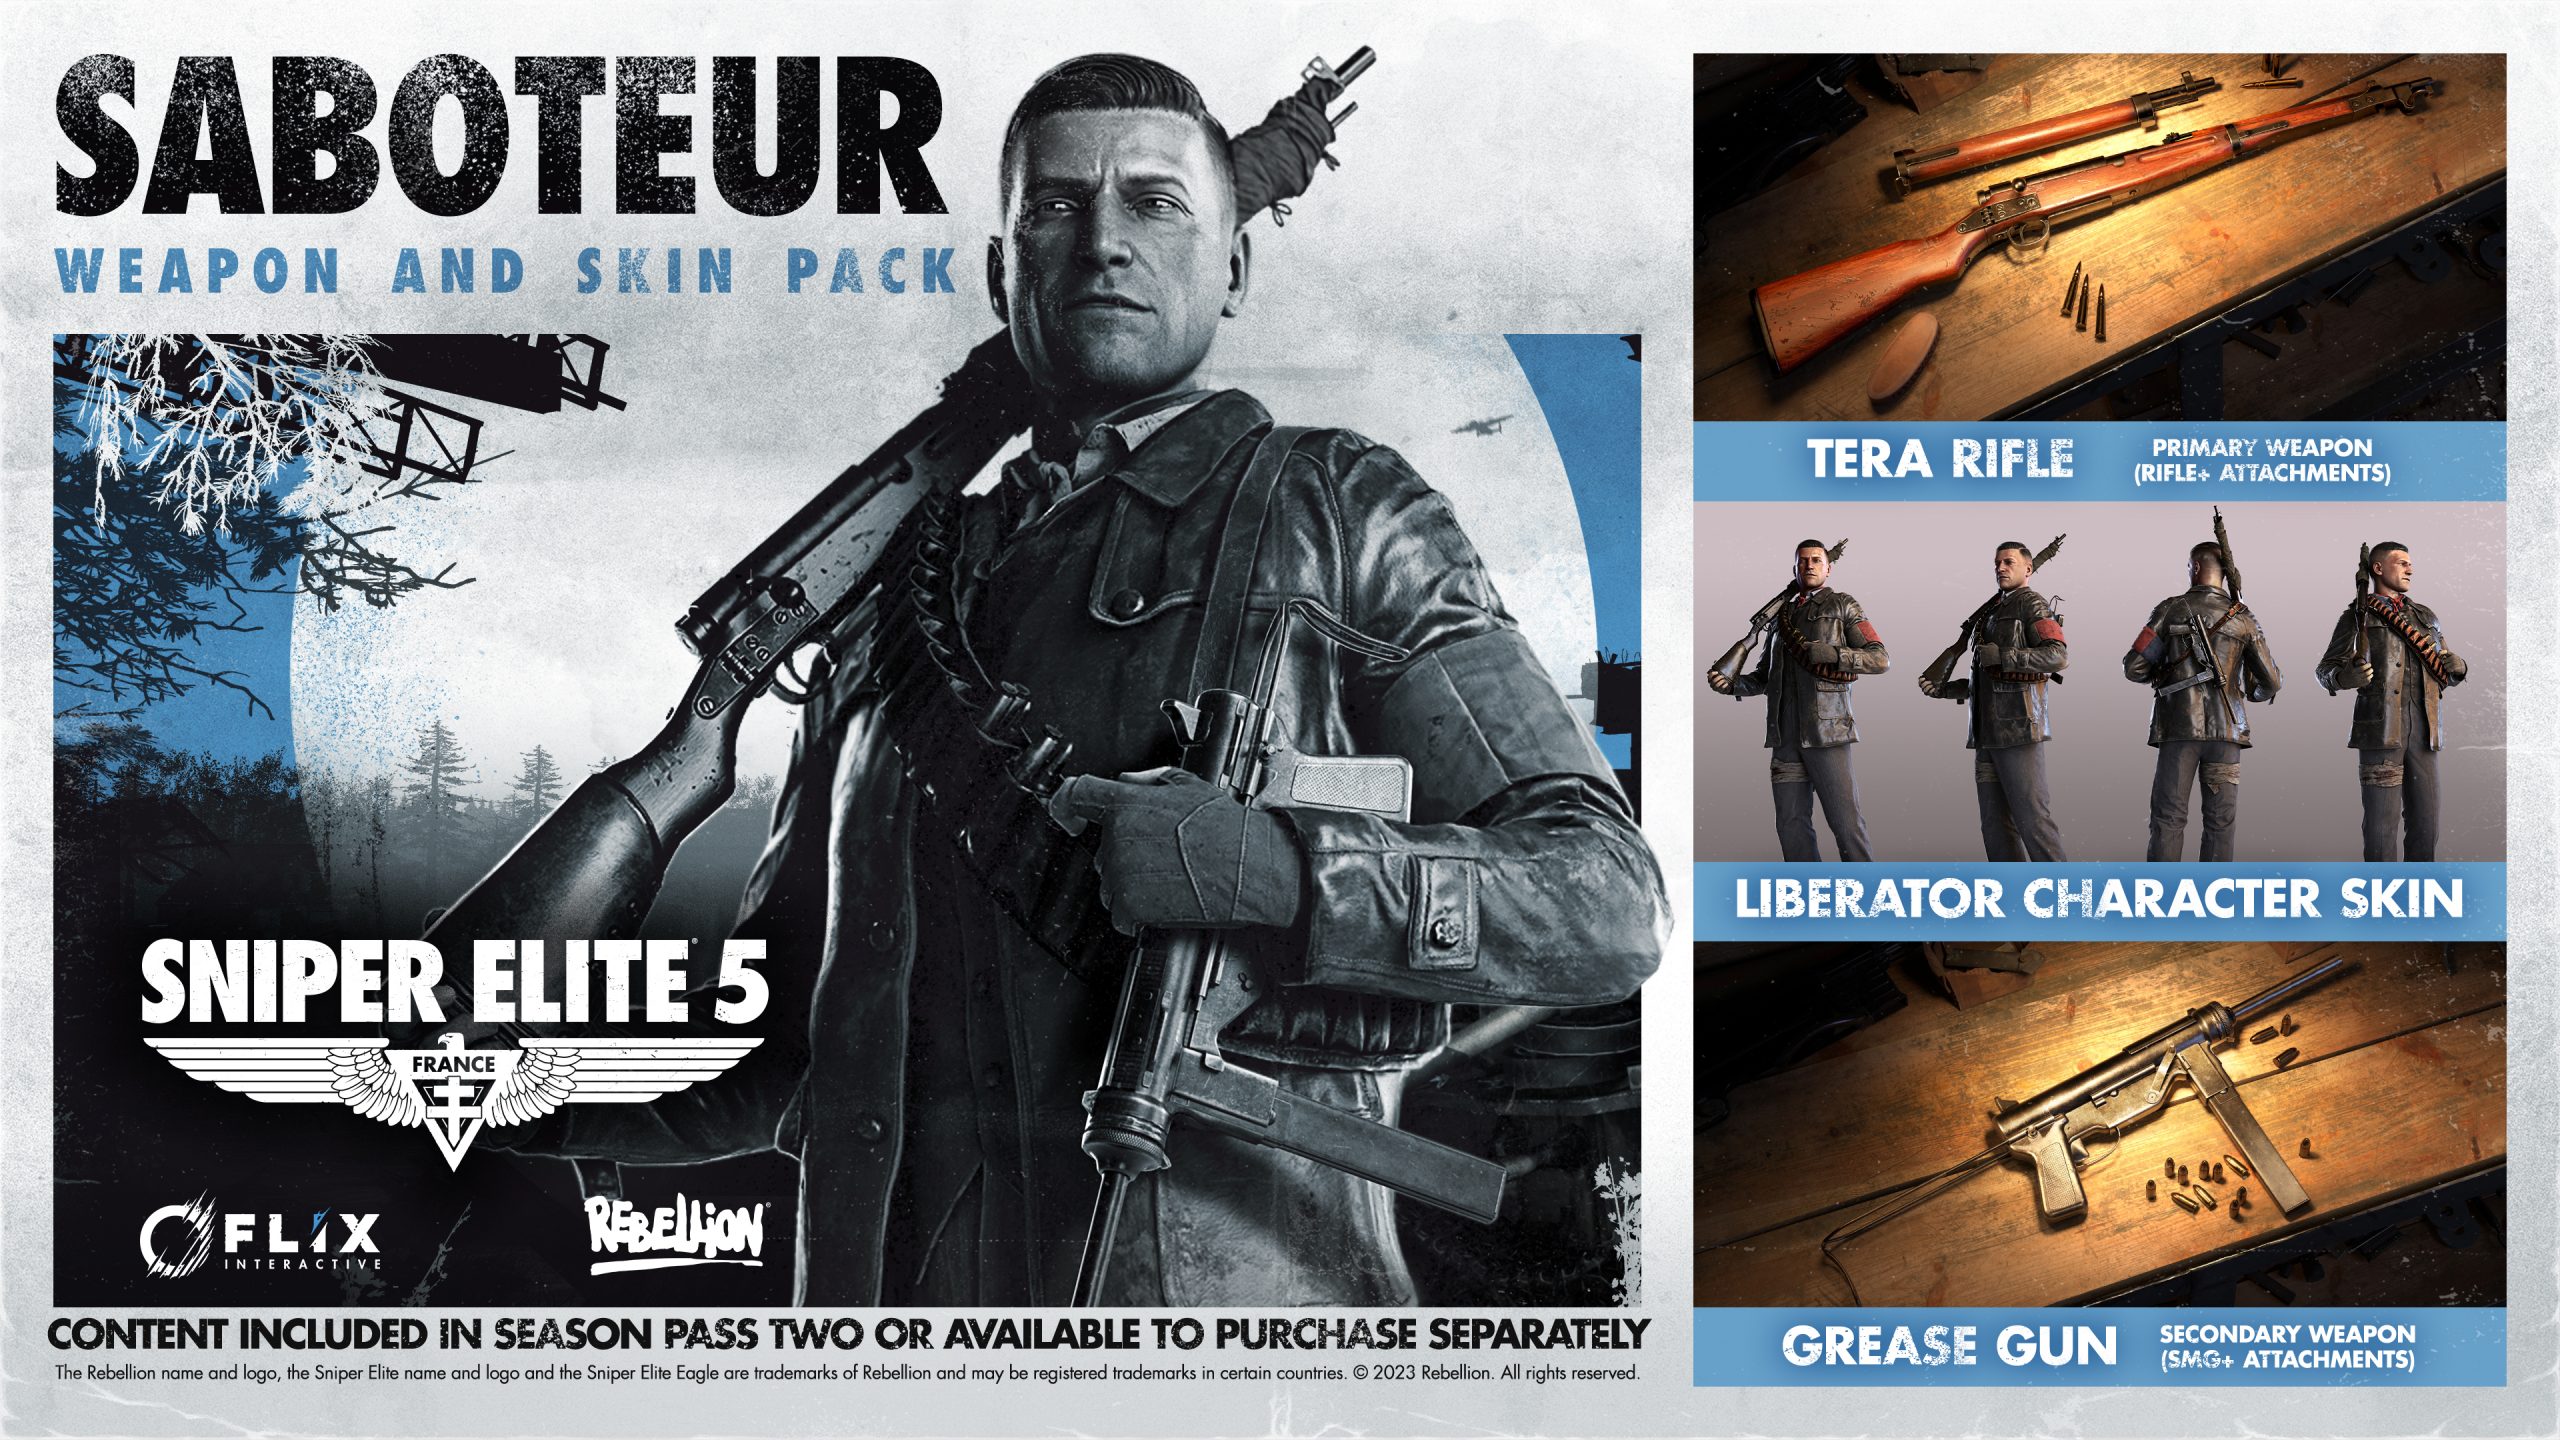 Sniper Elite 5 Saboteur Content Pack featuring Tera Rifle, Liberator Character Skin and Grease Gun